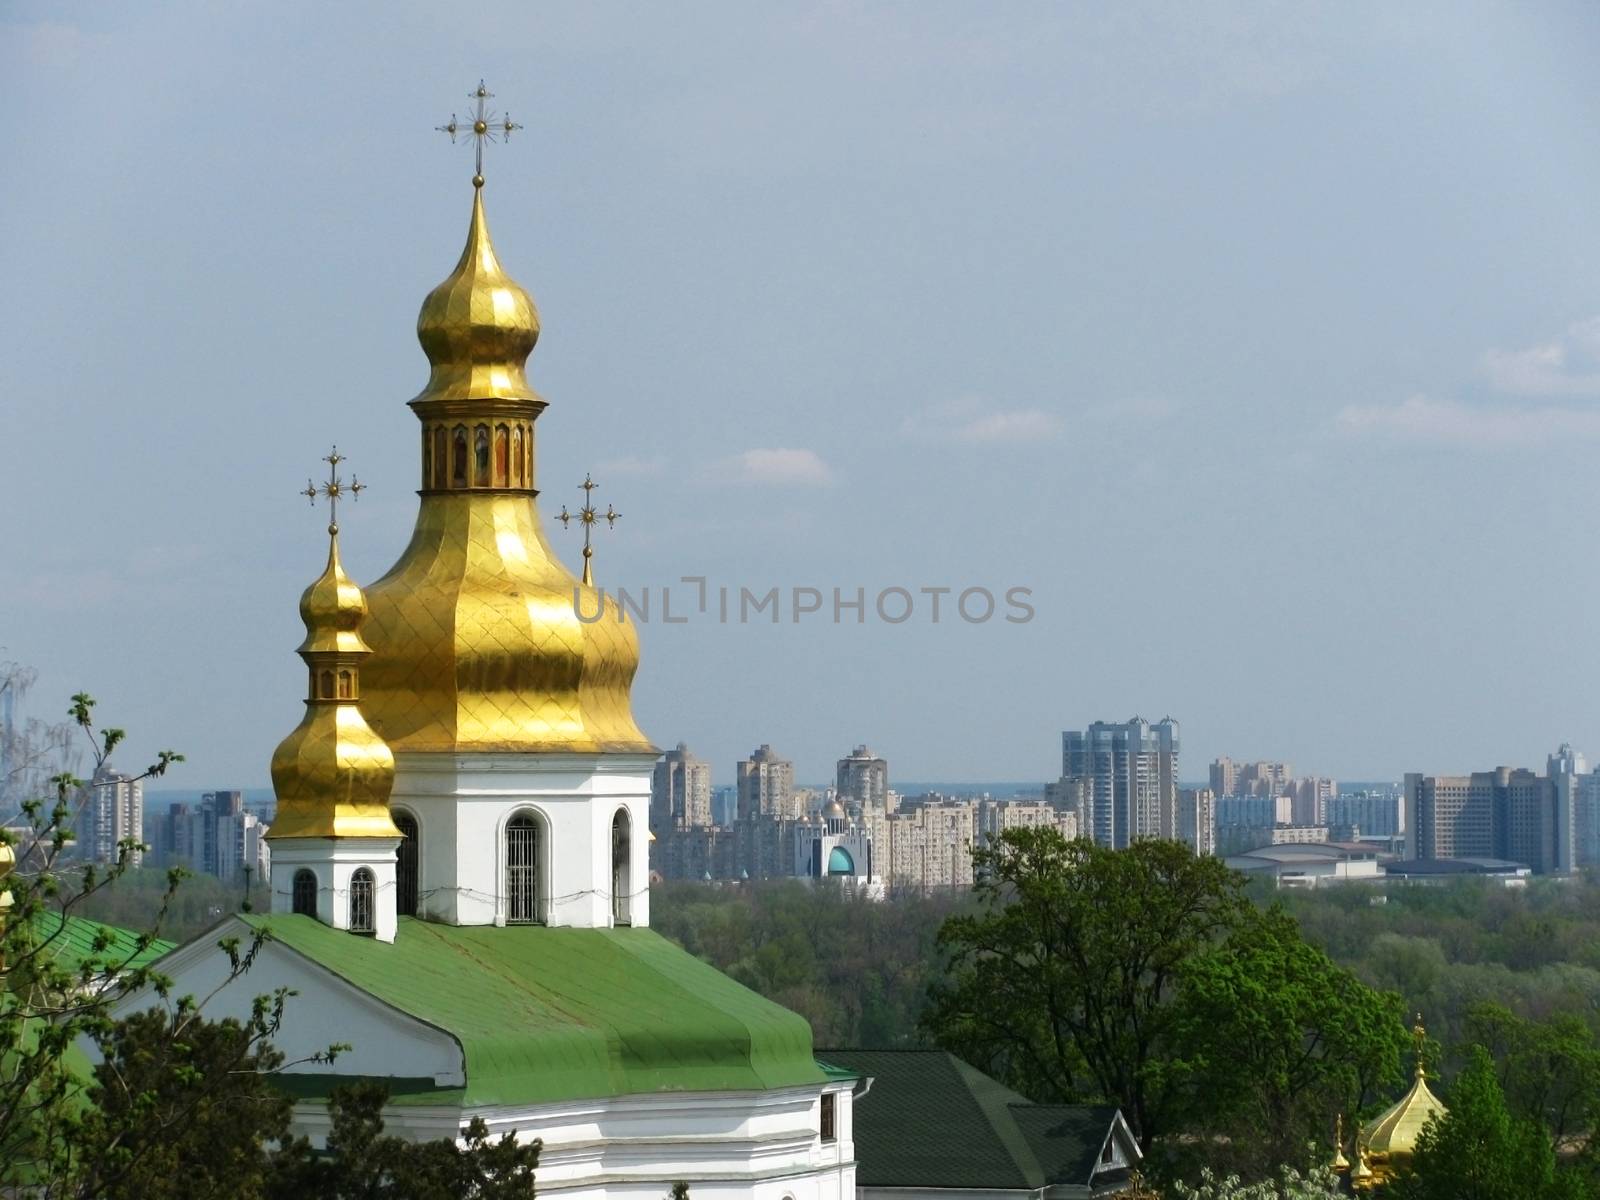 Domes of orthodox church on a background of urban development in by Grommik